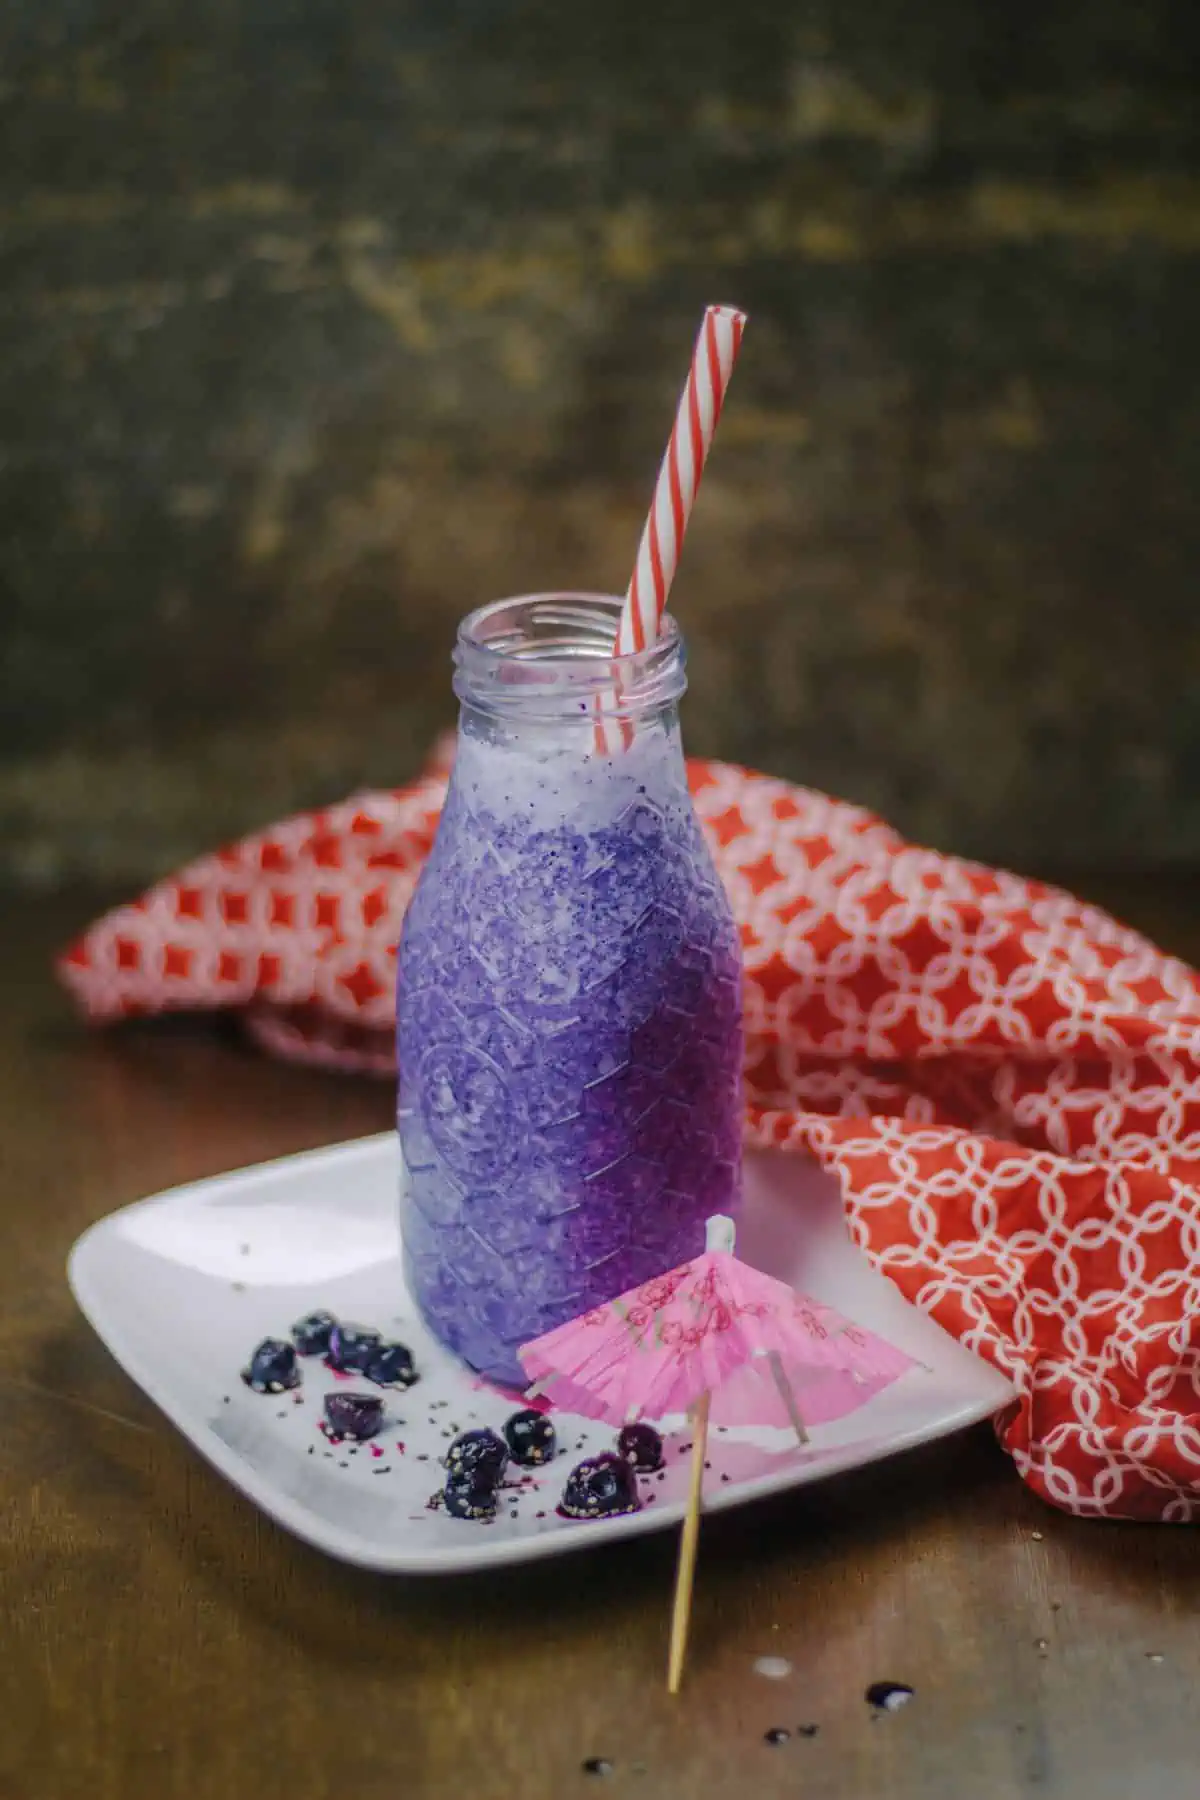 Blueberry smoothie in a glass bottle with straw.